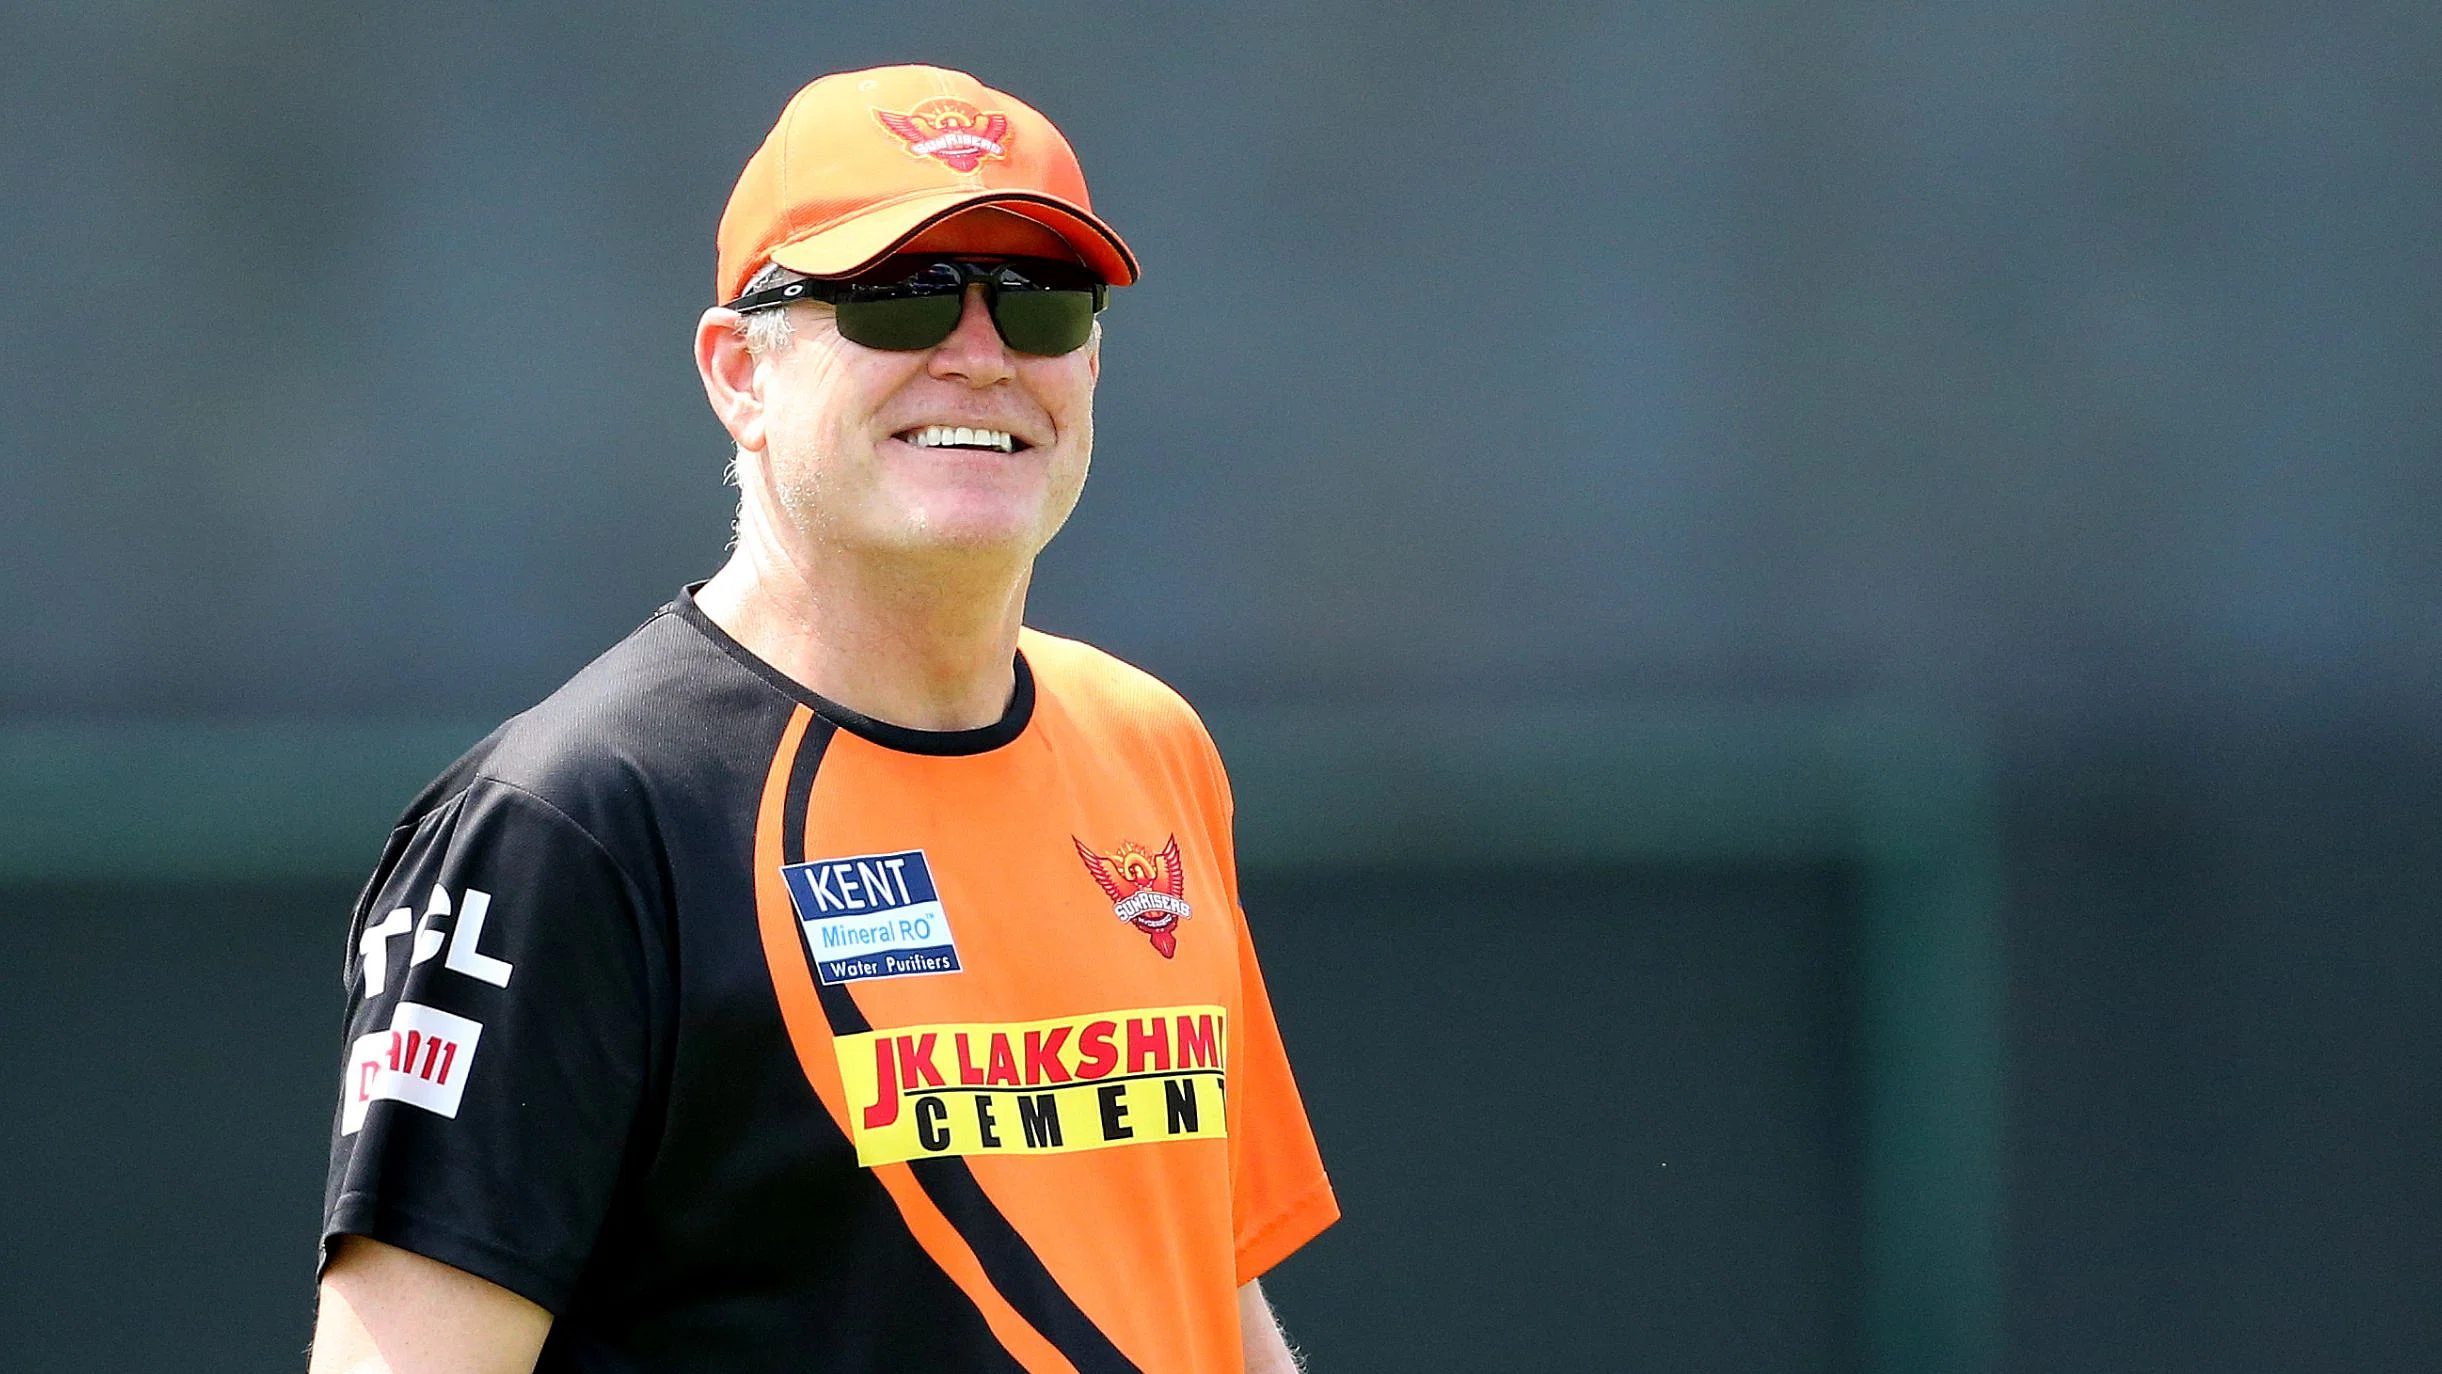 Tom Moody eyes head coach job of Indian team; expected to apply for 4th time: Report